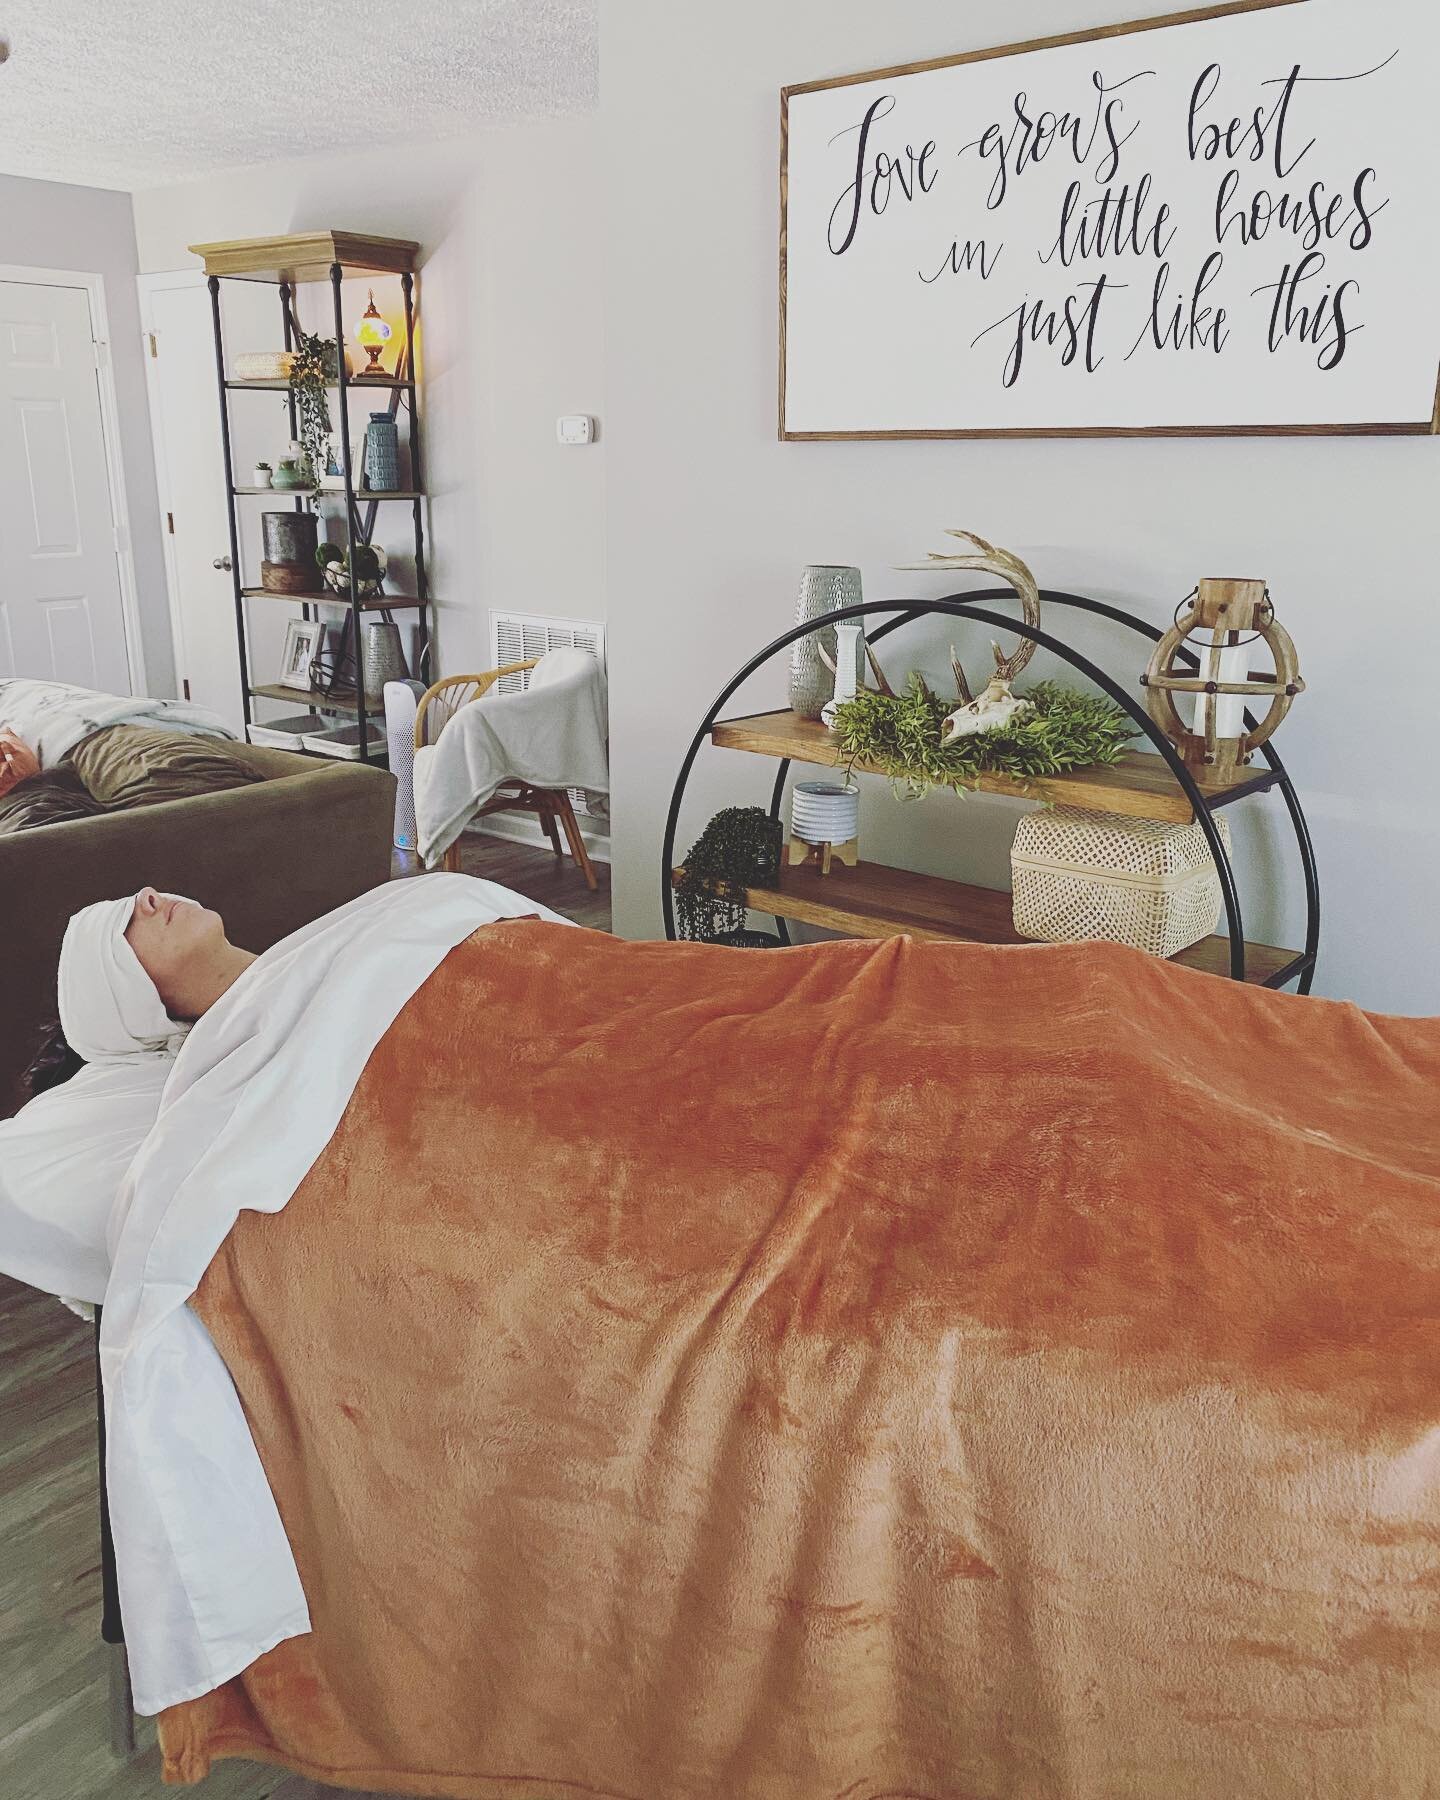 Saturday morning in home massage. Name a better way to start the weekend. 

#native #selfcare #nativemassagecompany #massage #mobilemassage  #wellness #massagewellness #nashvillemassage #local #nashvillebachelorette #musiccity
#bachparty #nashbash #t